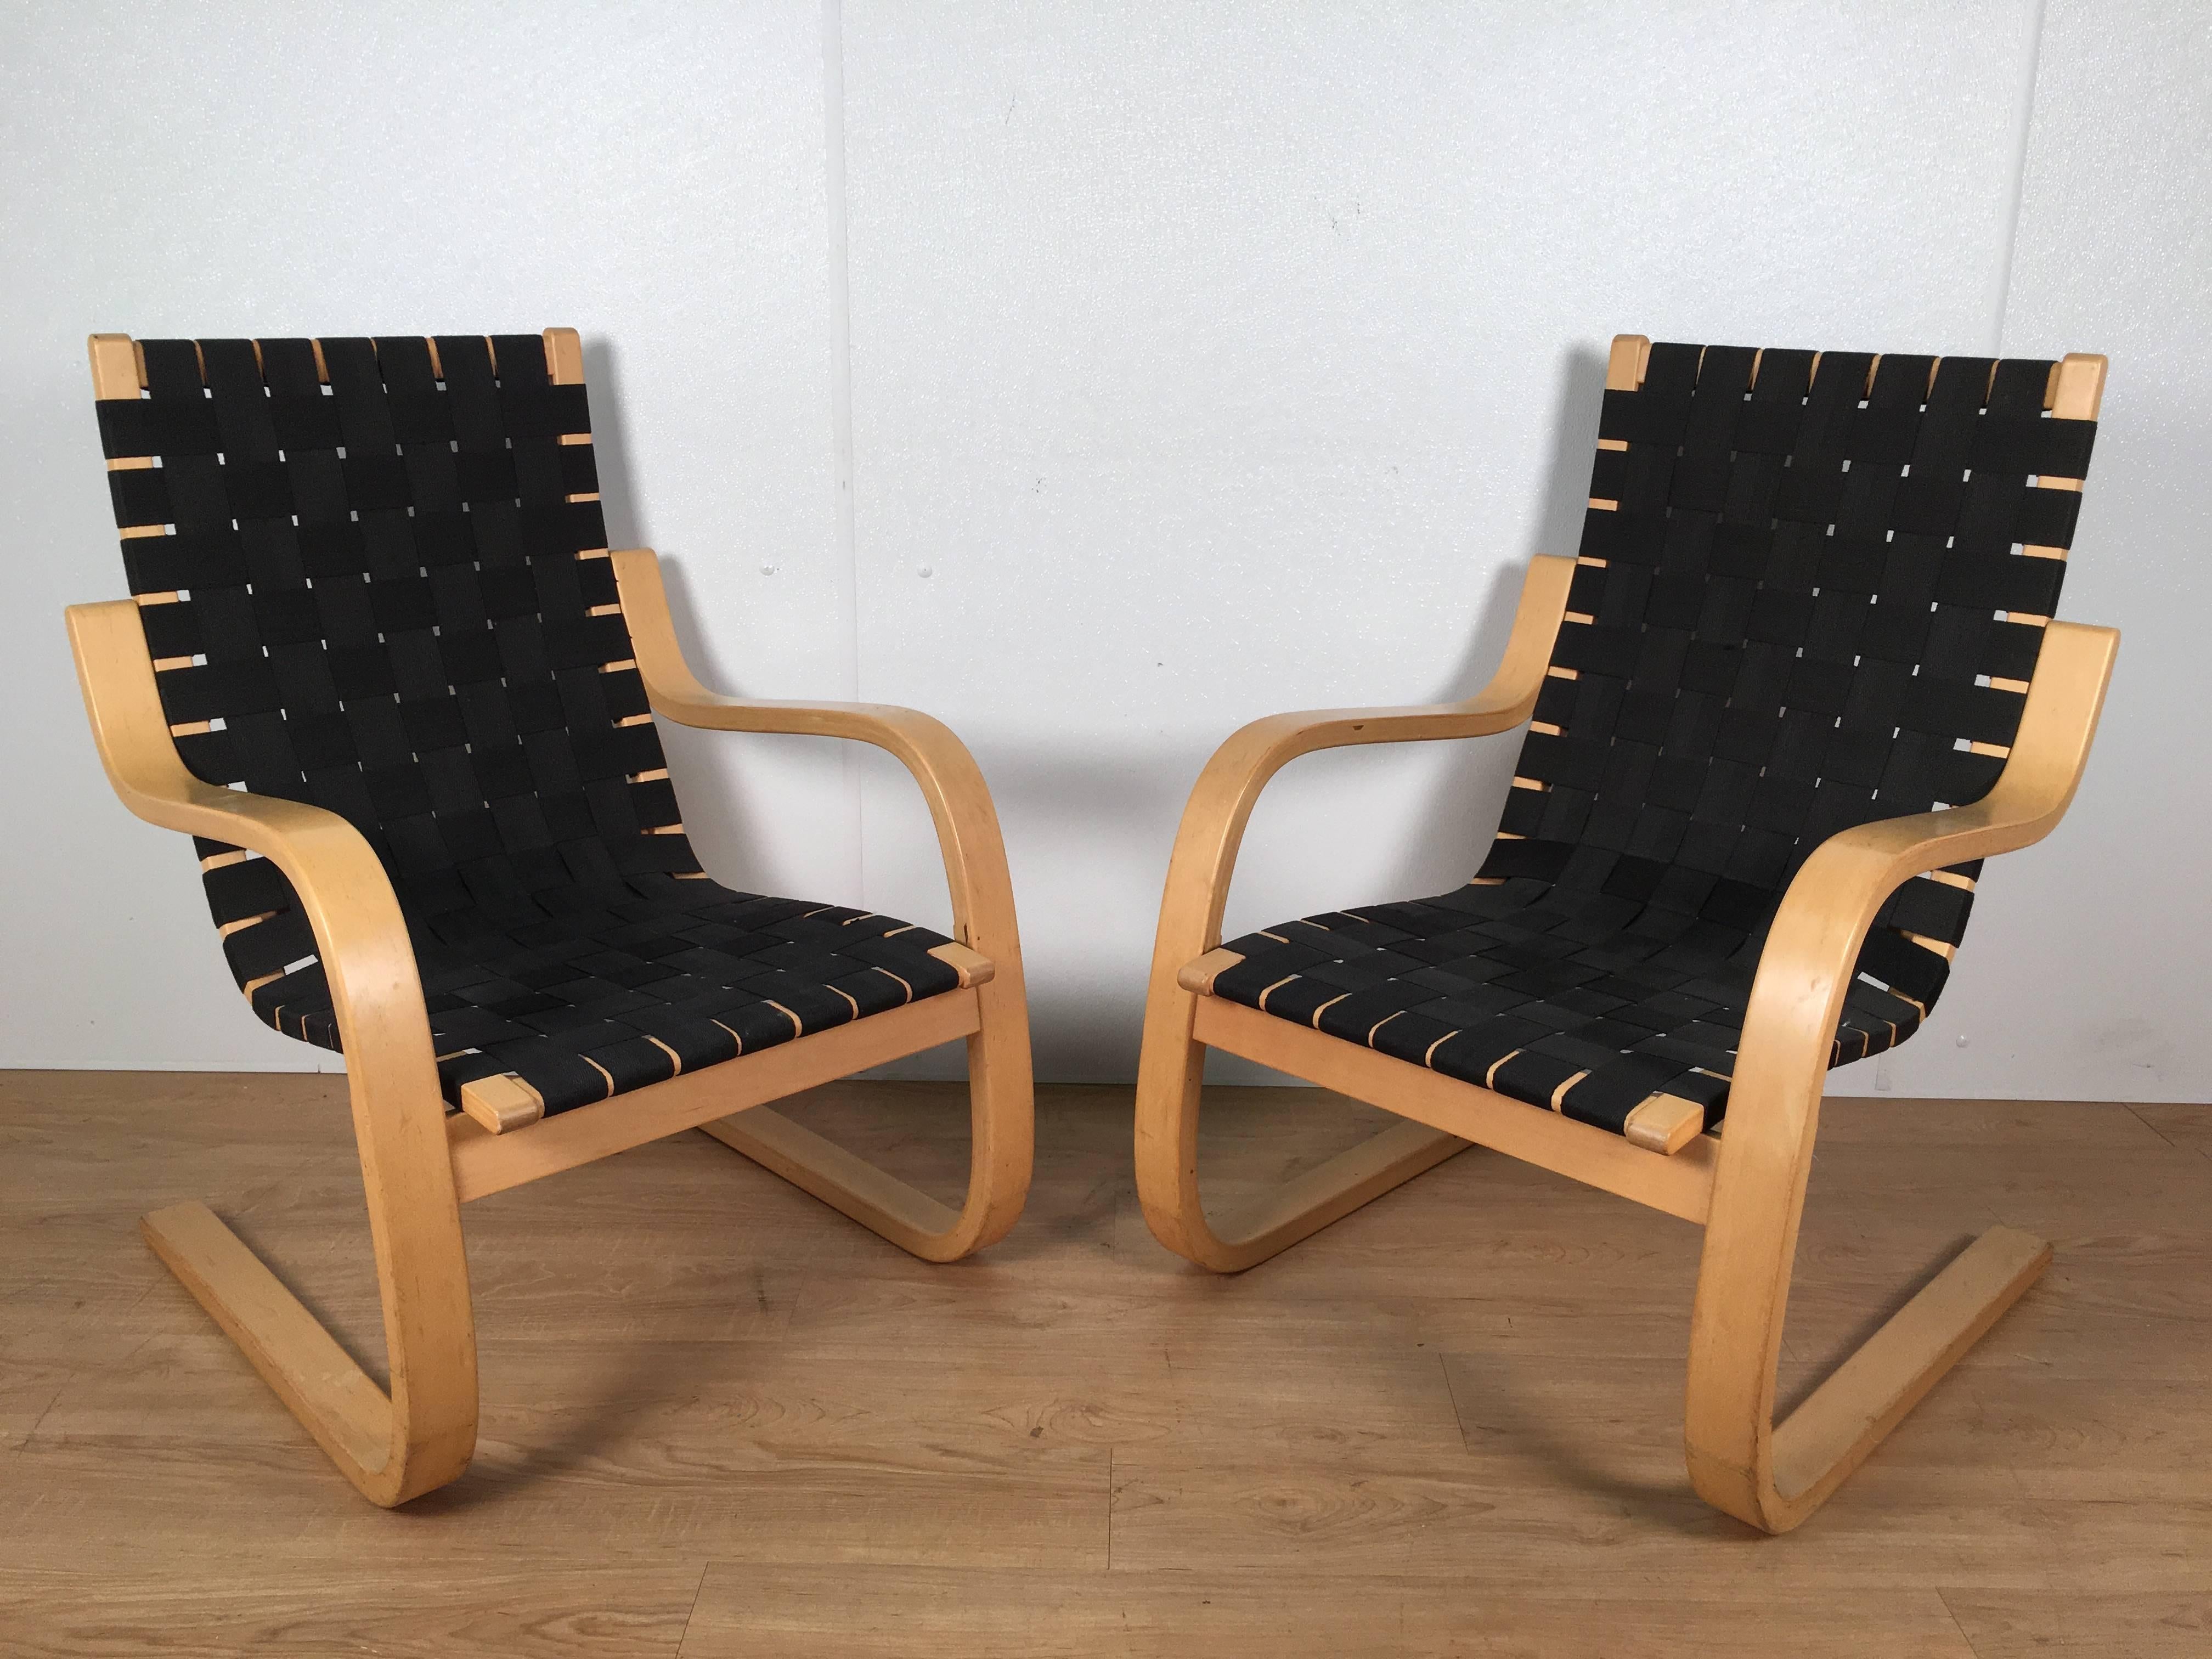 Pair of Alvar Aalto #406 lounge chairs. Each one of typical form with woven black fabric and sculptural bentwood birch frame, by Artek, IFC.
   